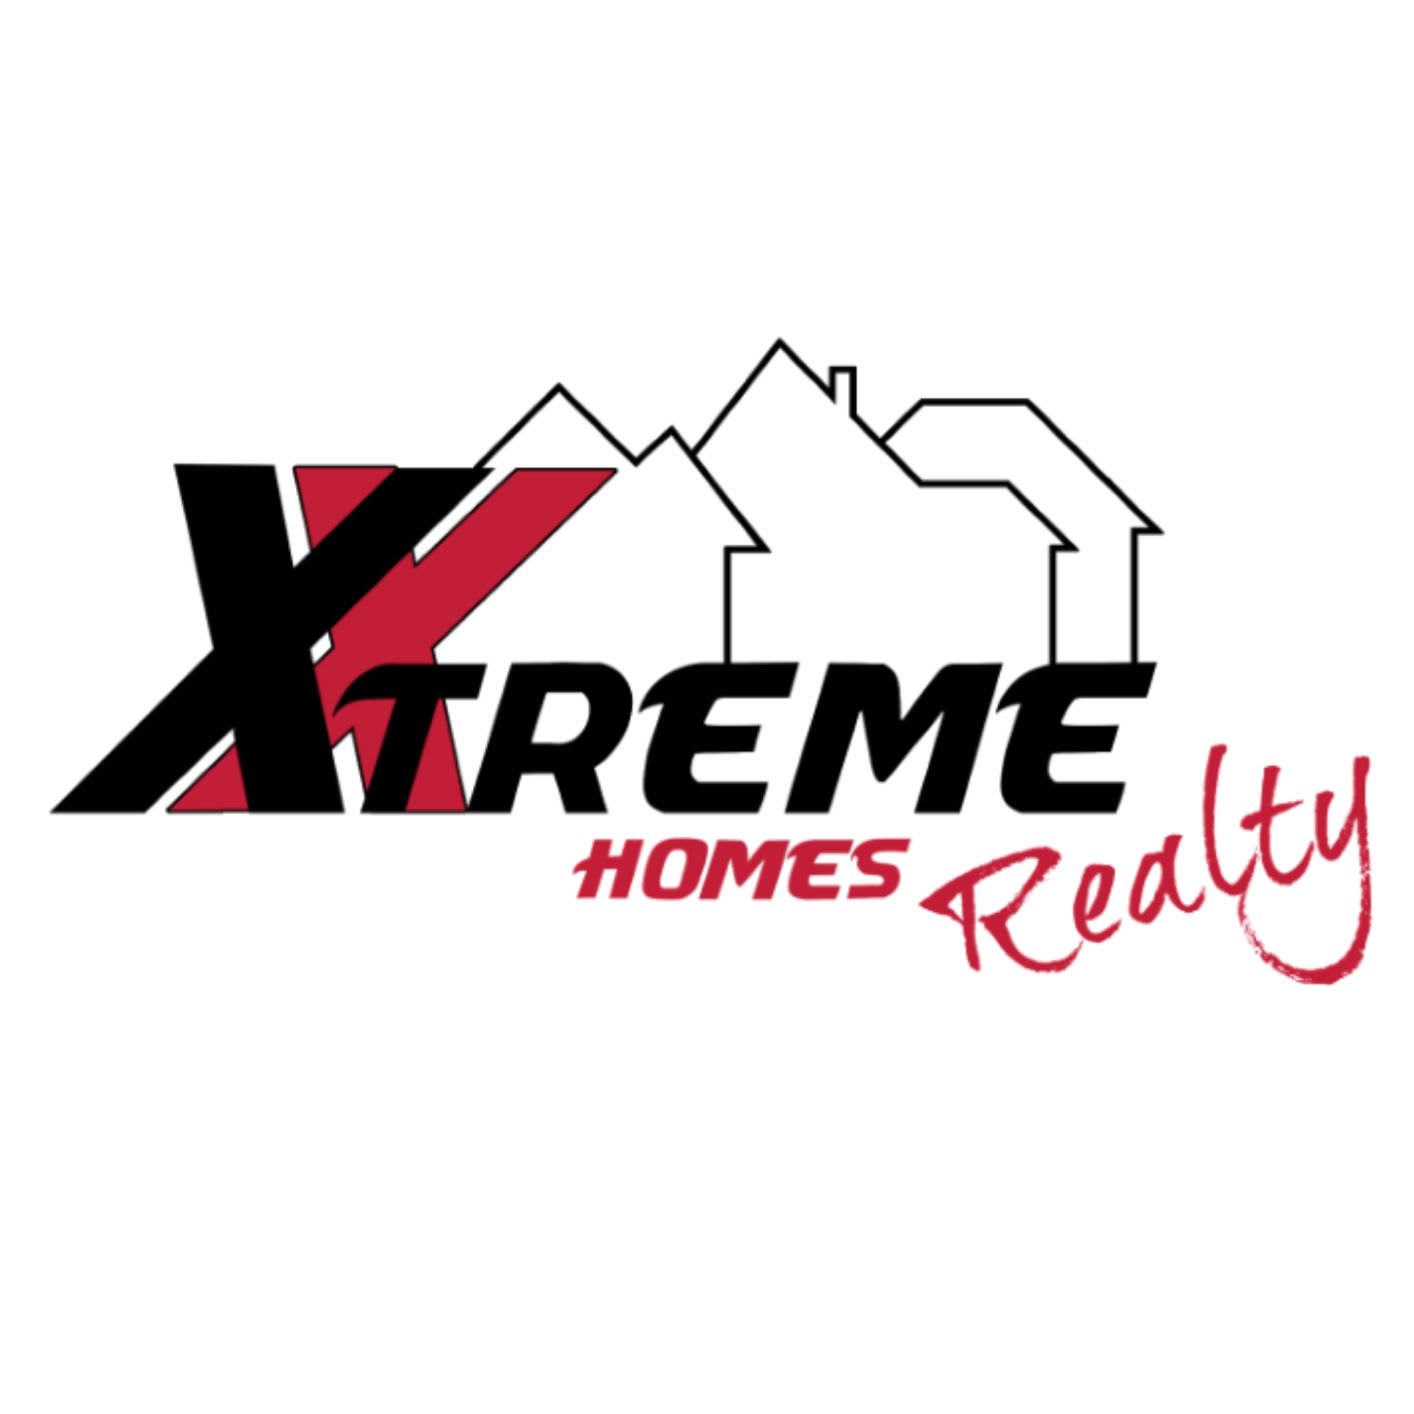 Xtreme Homes Realty